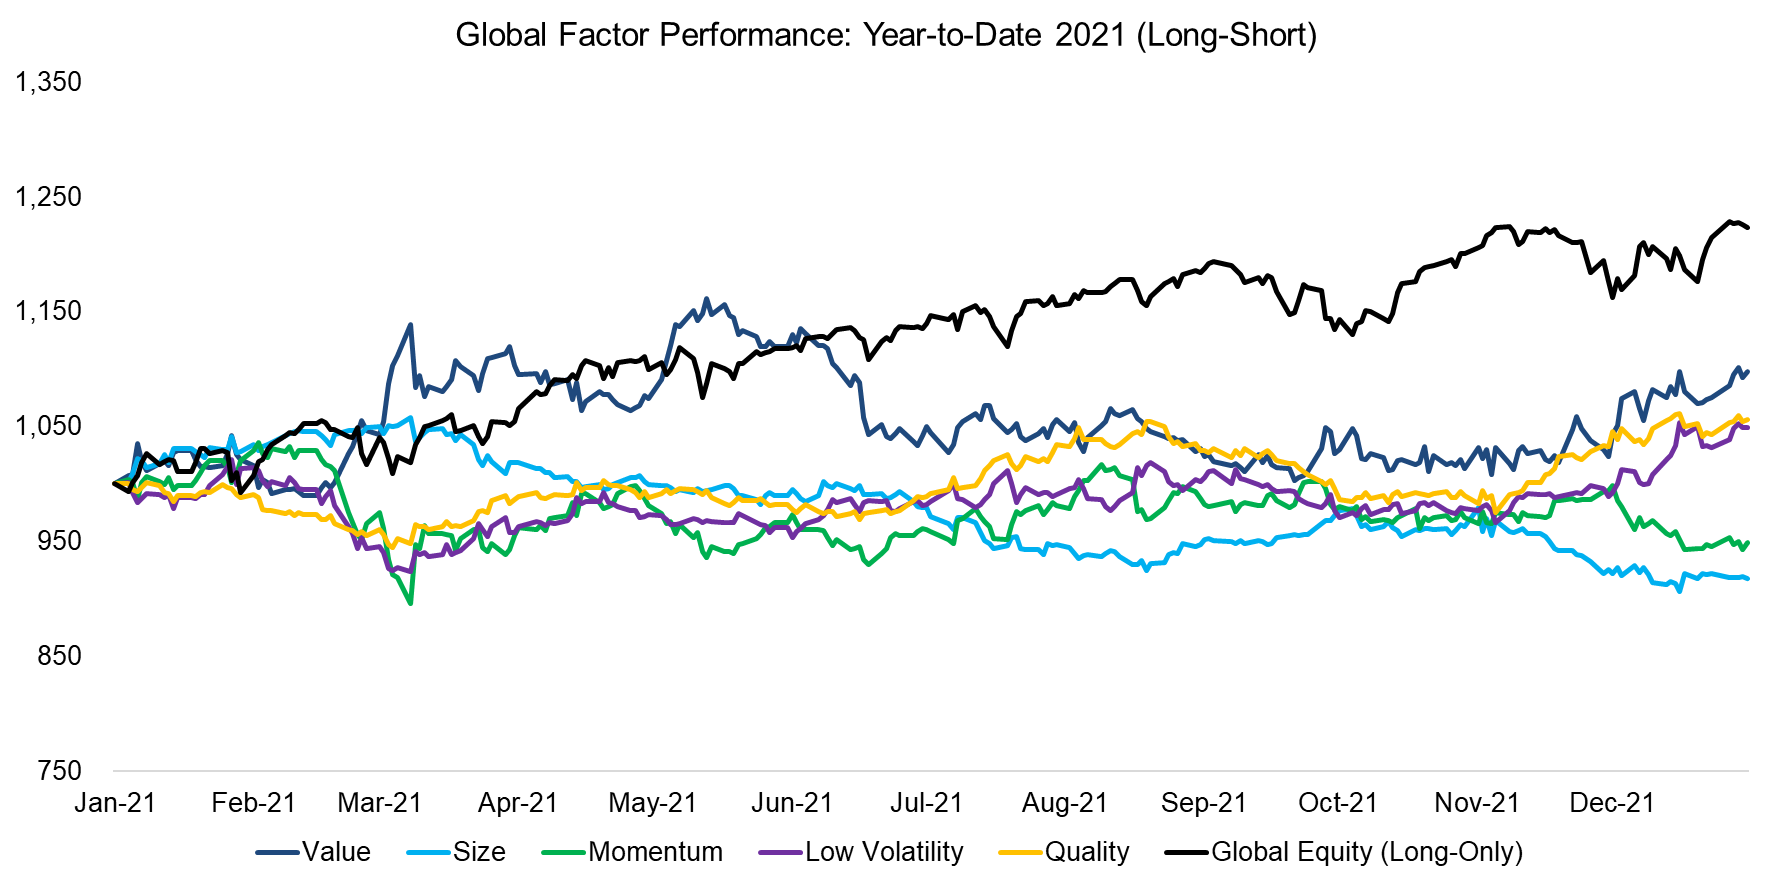 Global Factor Performance Year-to-Date 2021 (Long-Short)